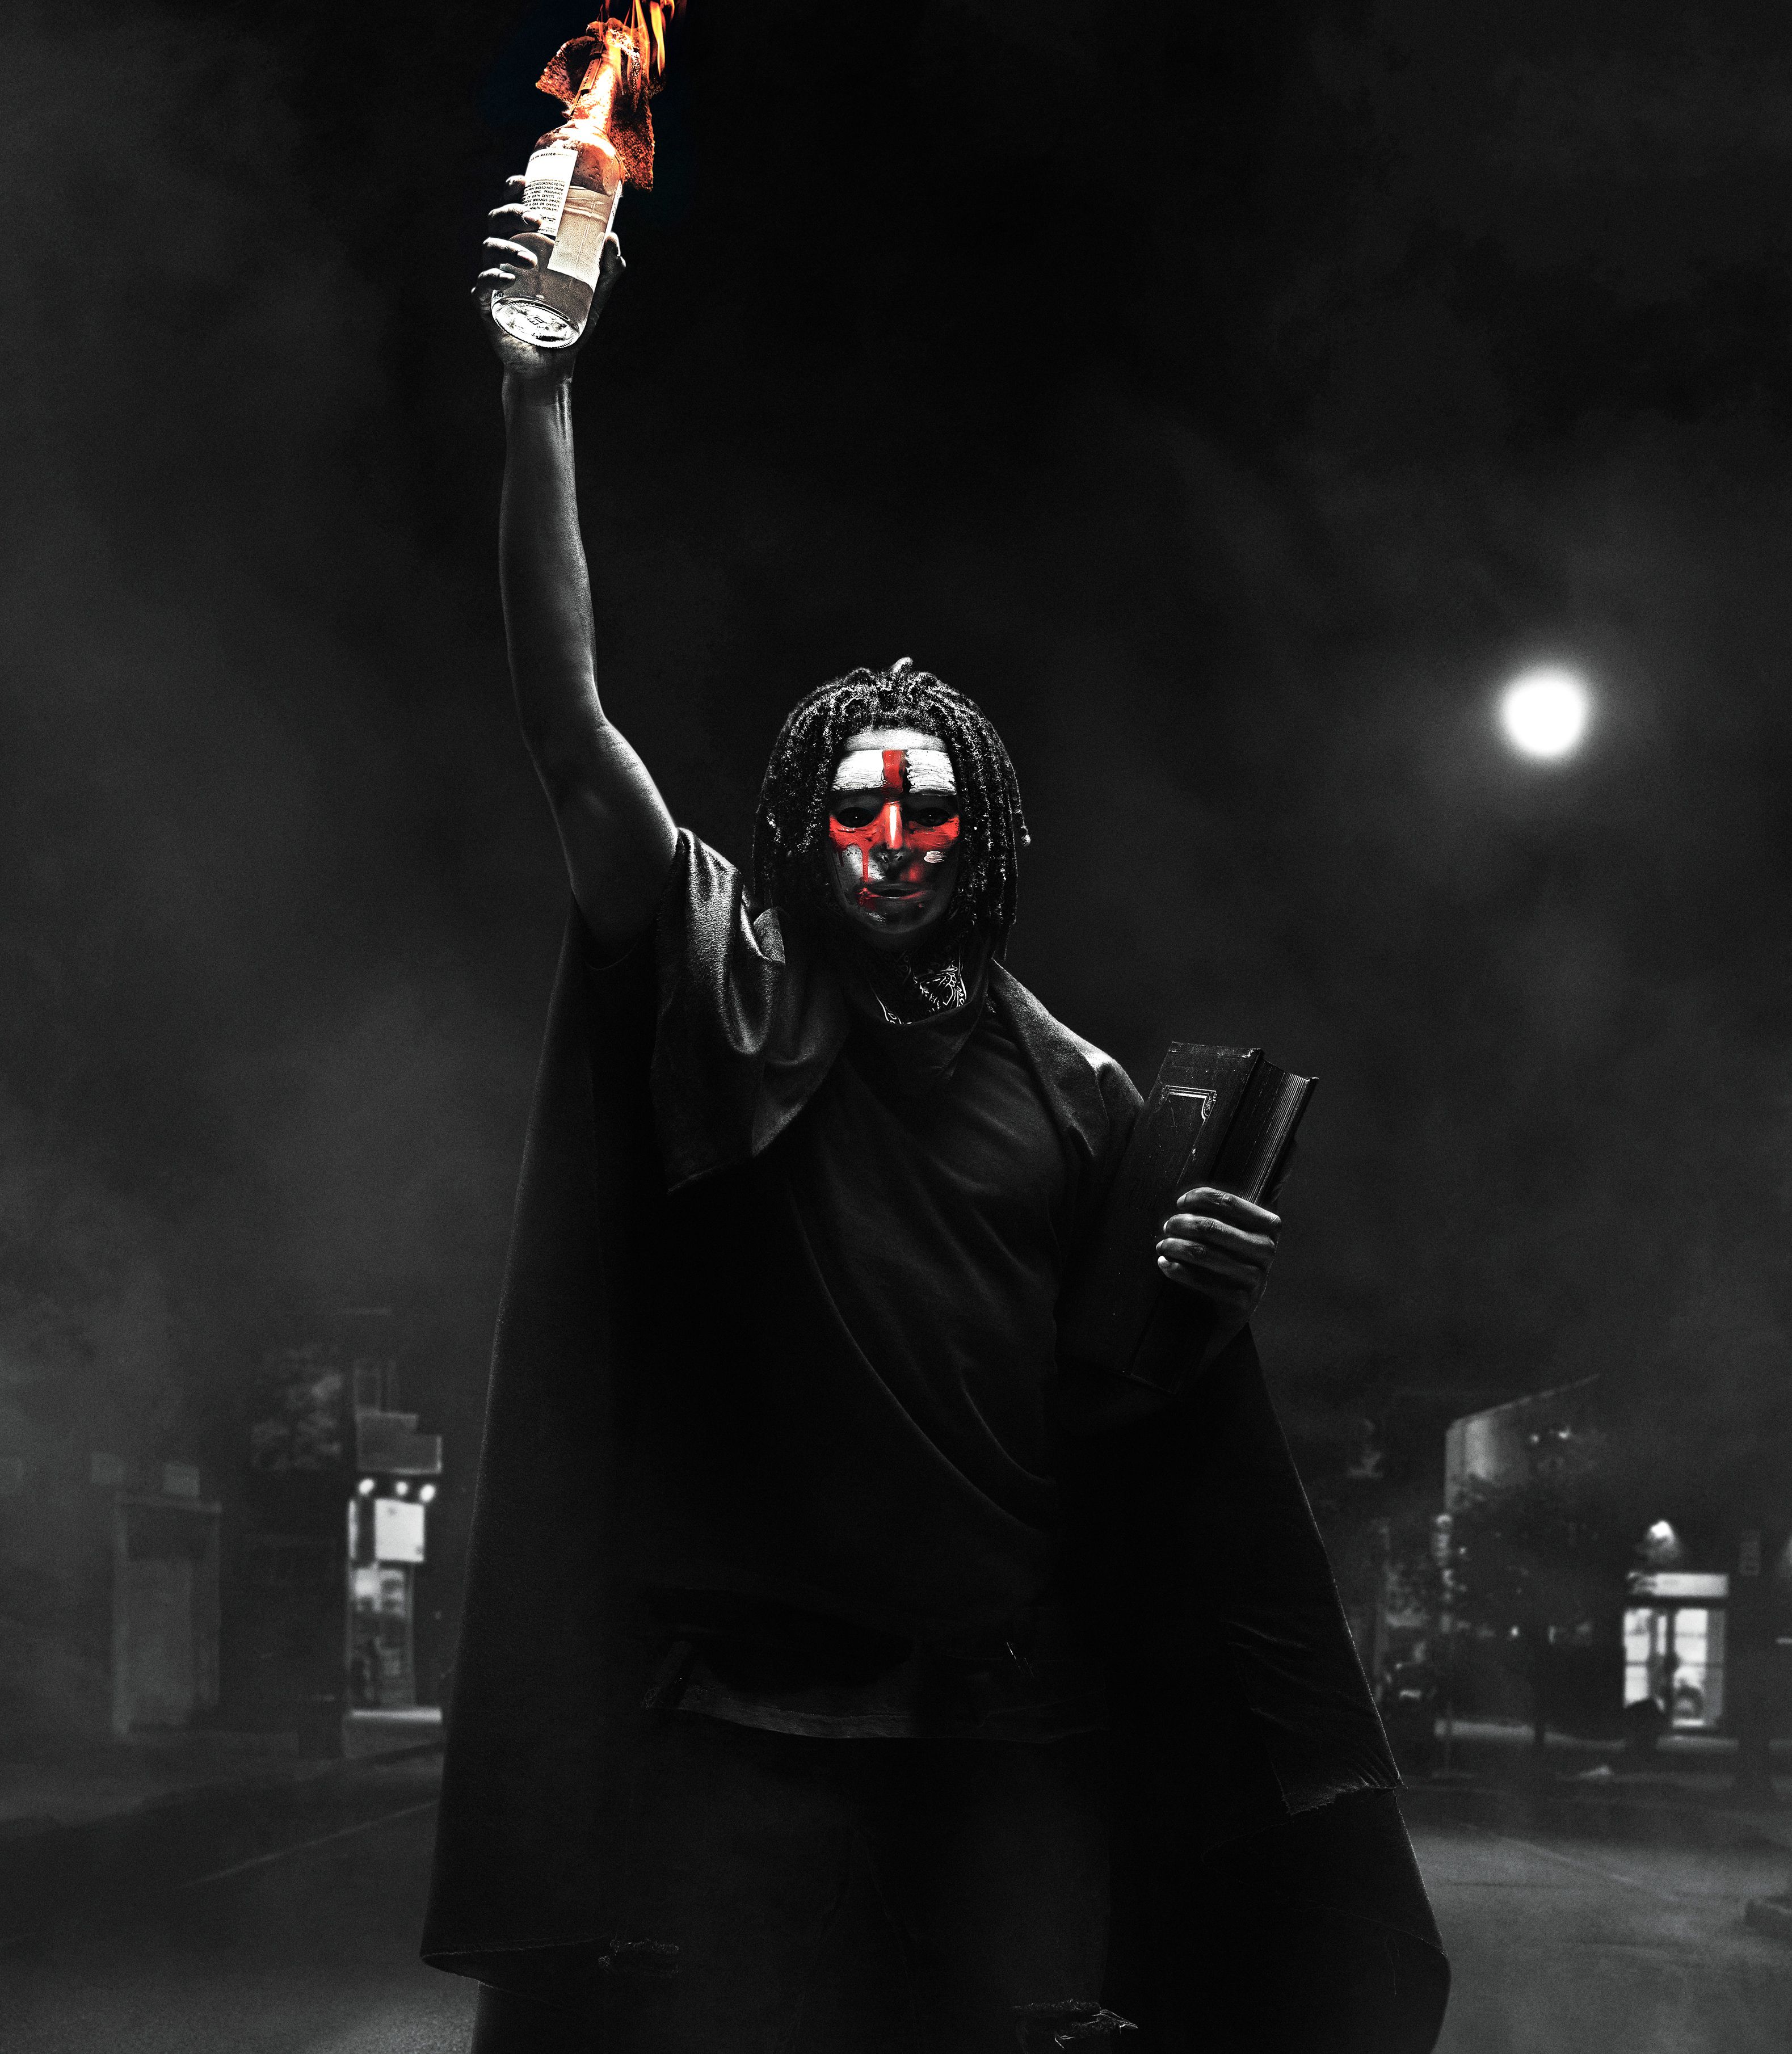 Wallpaper The First Purge, Action, Horror, Sci Fi, Movies